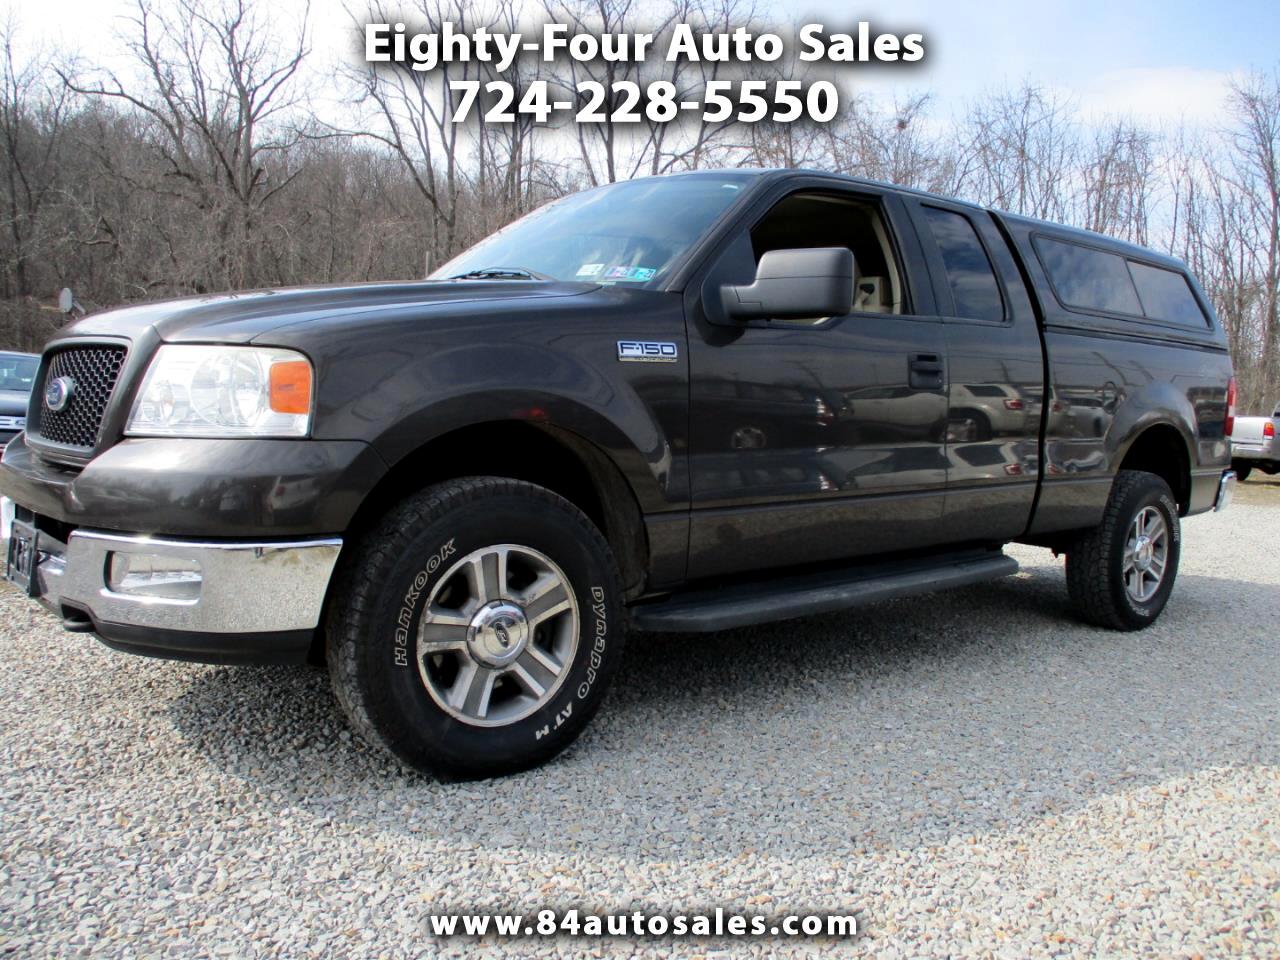 Ford F-150 Supercab 145" Lariat 4WD 2005